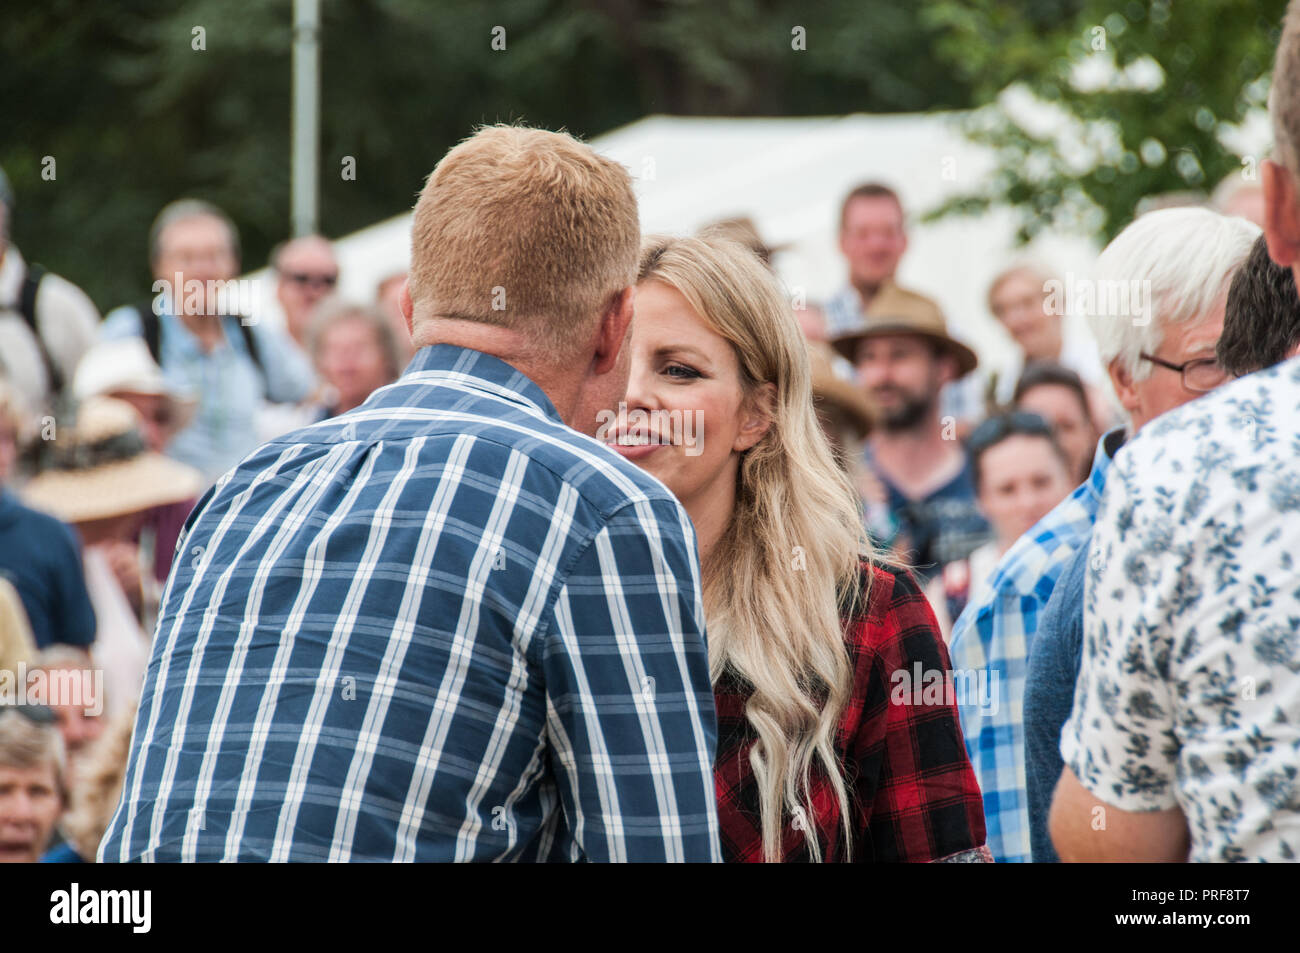 Around the UK - Countryfile Live - Ellie Harrison, in conversation - Outside Broadcast recording venue Stock Photo